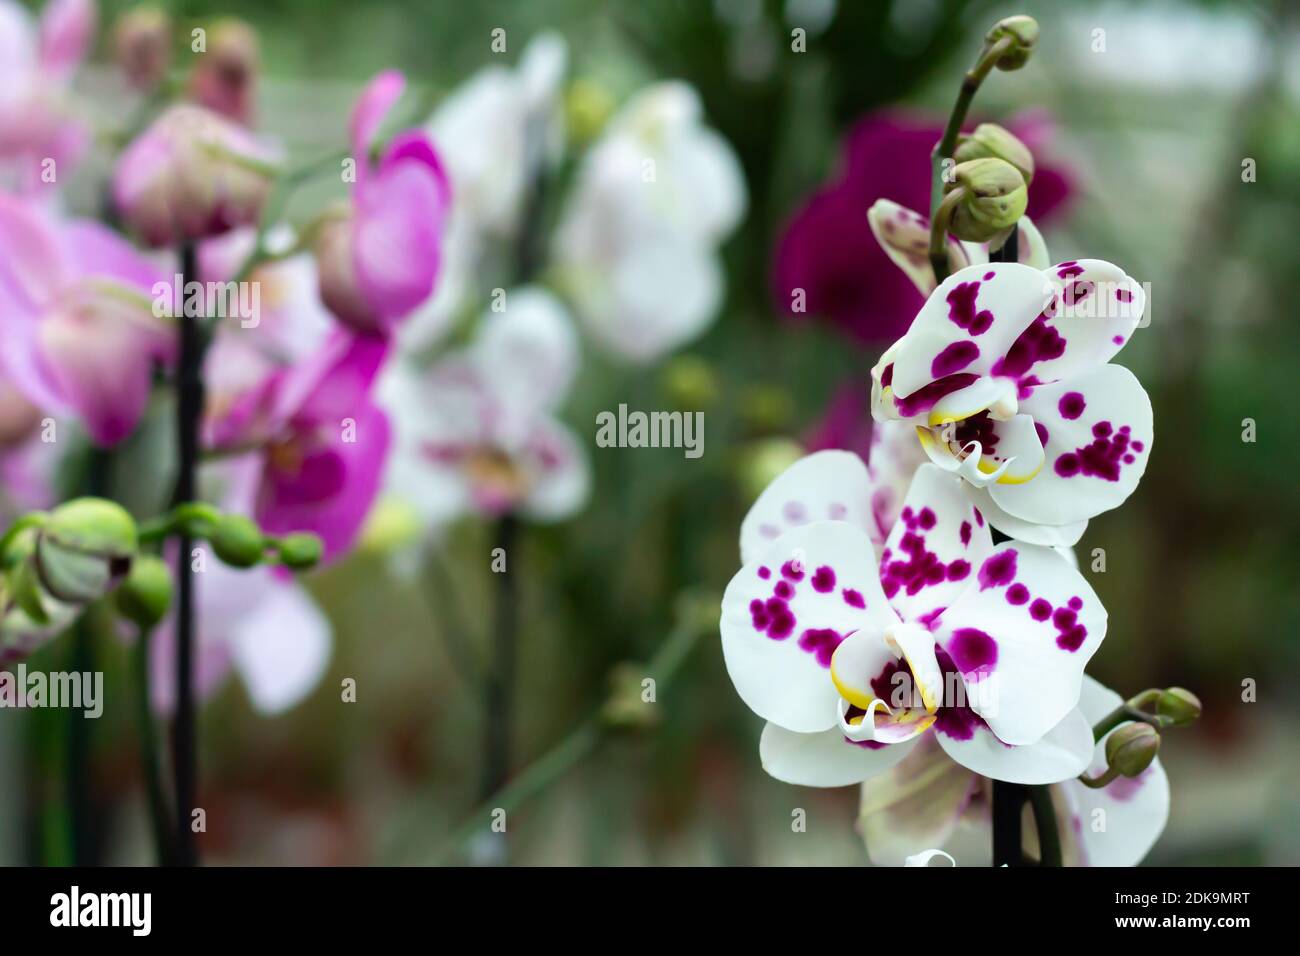 Branch of white and purple orchid flower phalaenopsis in tropical garden close-up Stock Photo